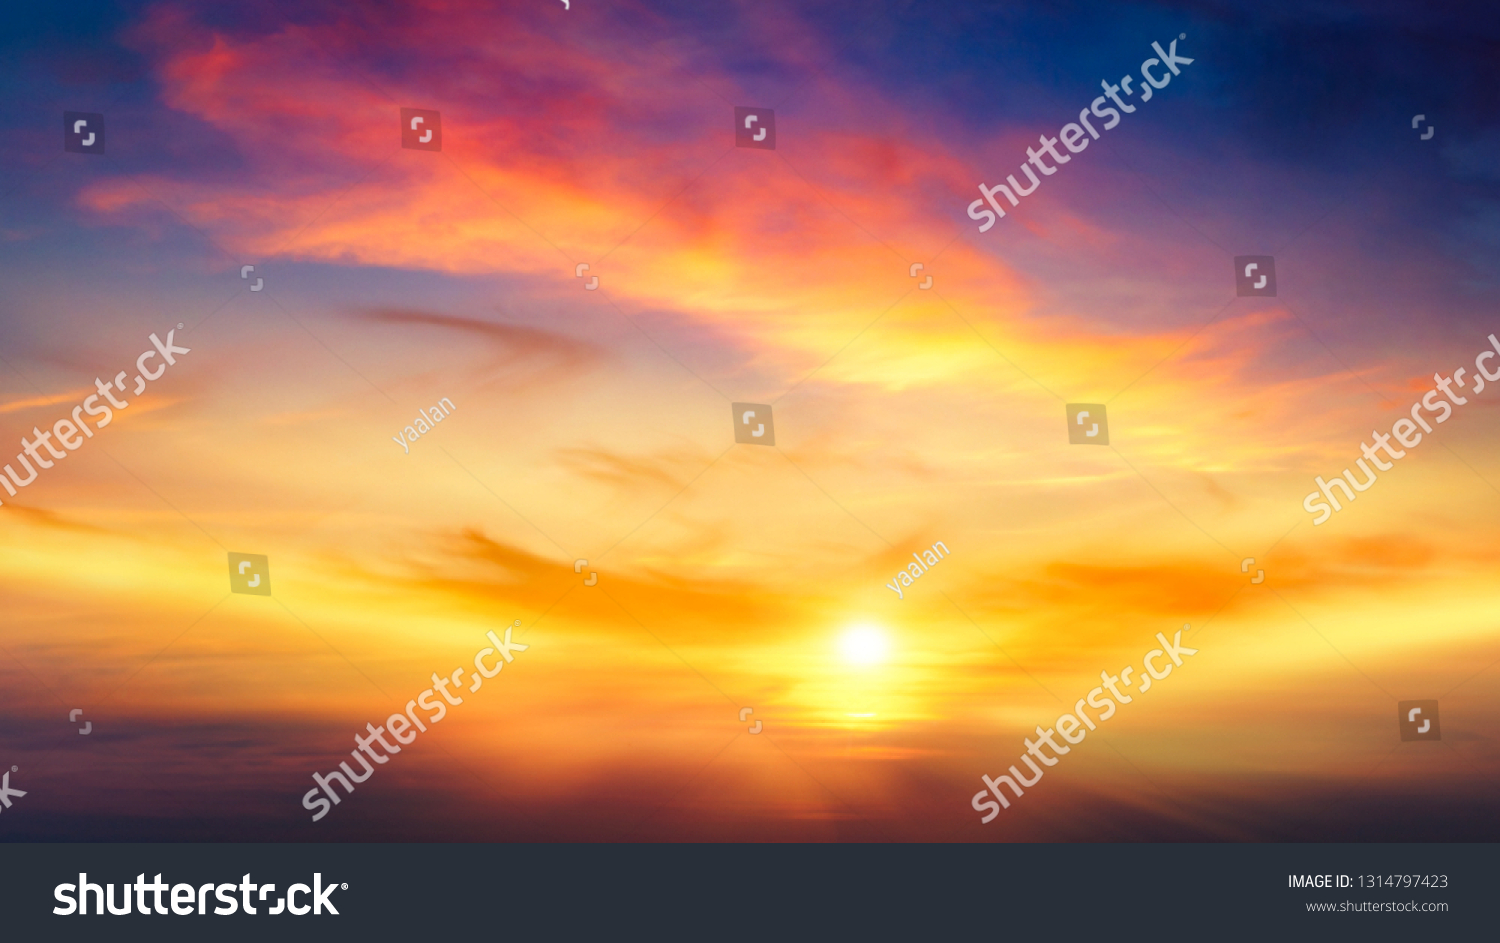 light about the sky . Paradise heaven . Dramatic nature background . Journey of the Soul . background sky at sunset and dawn . #1314797423